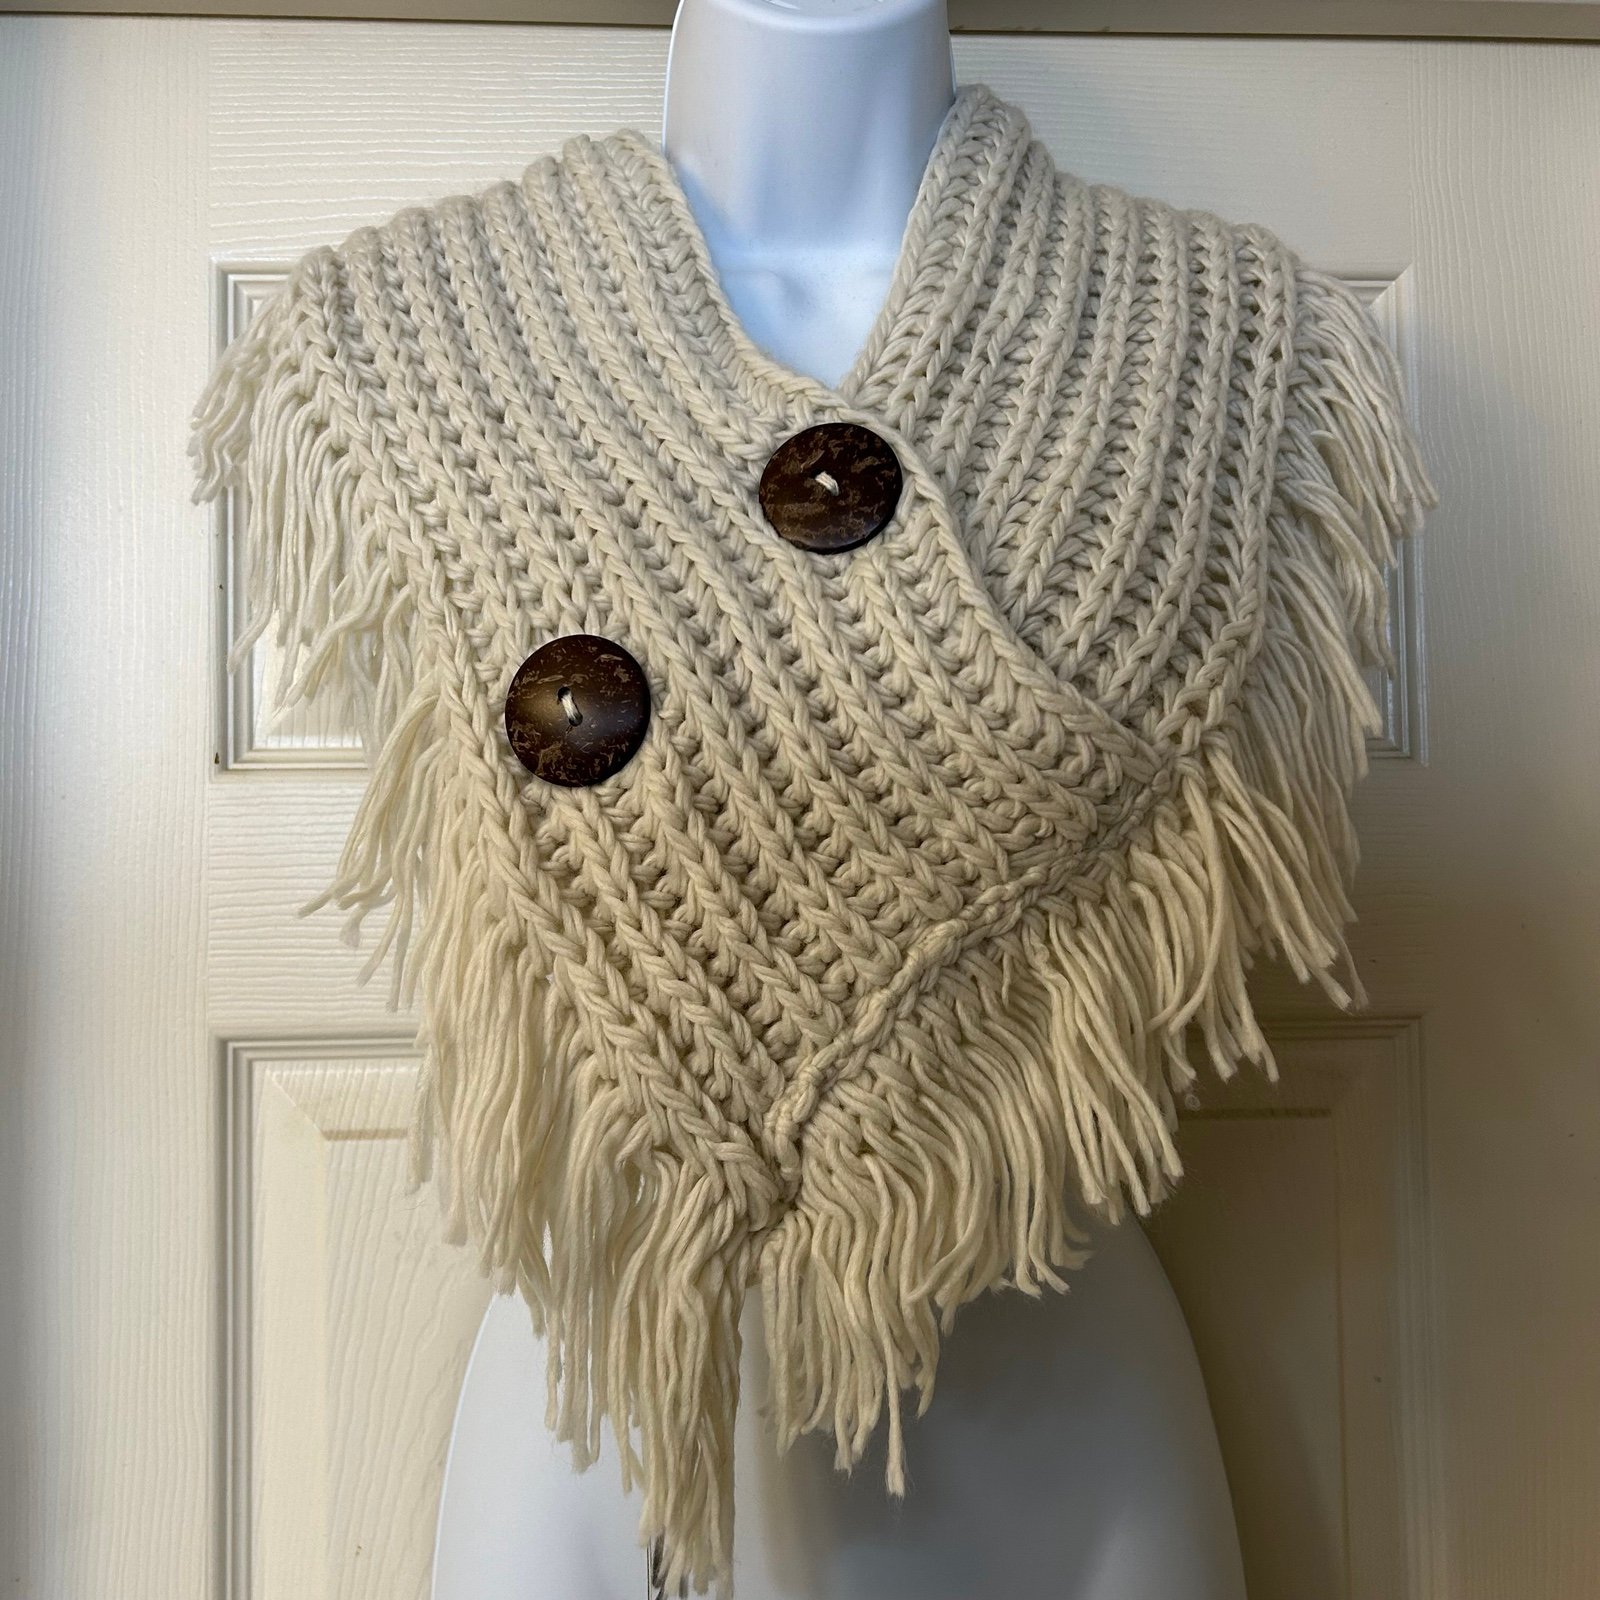 save up to 70% Ivory Tassel Shawl with Button accents H62FRjdTk Cool